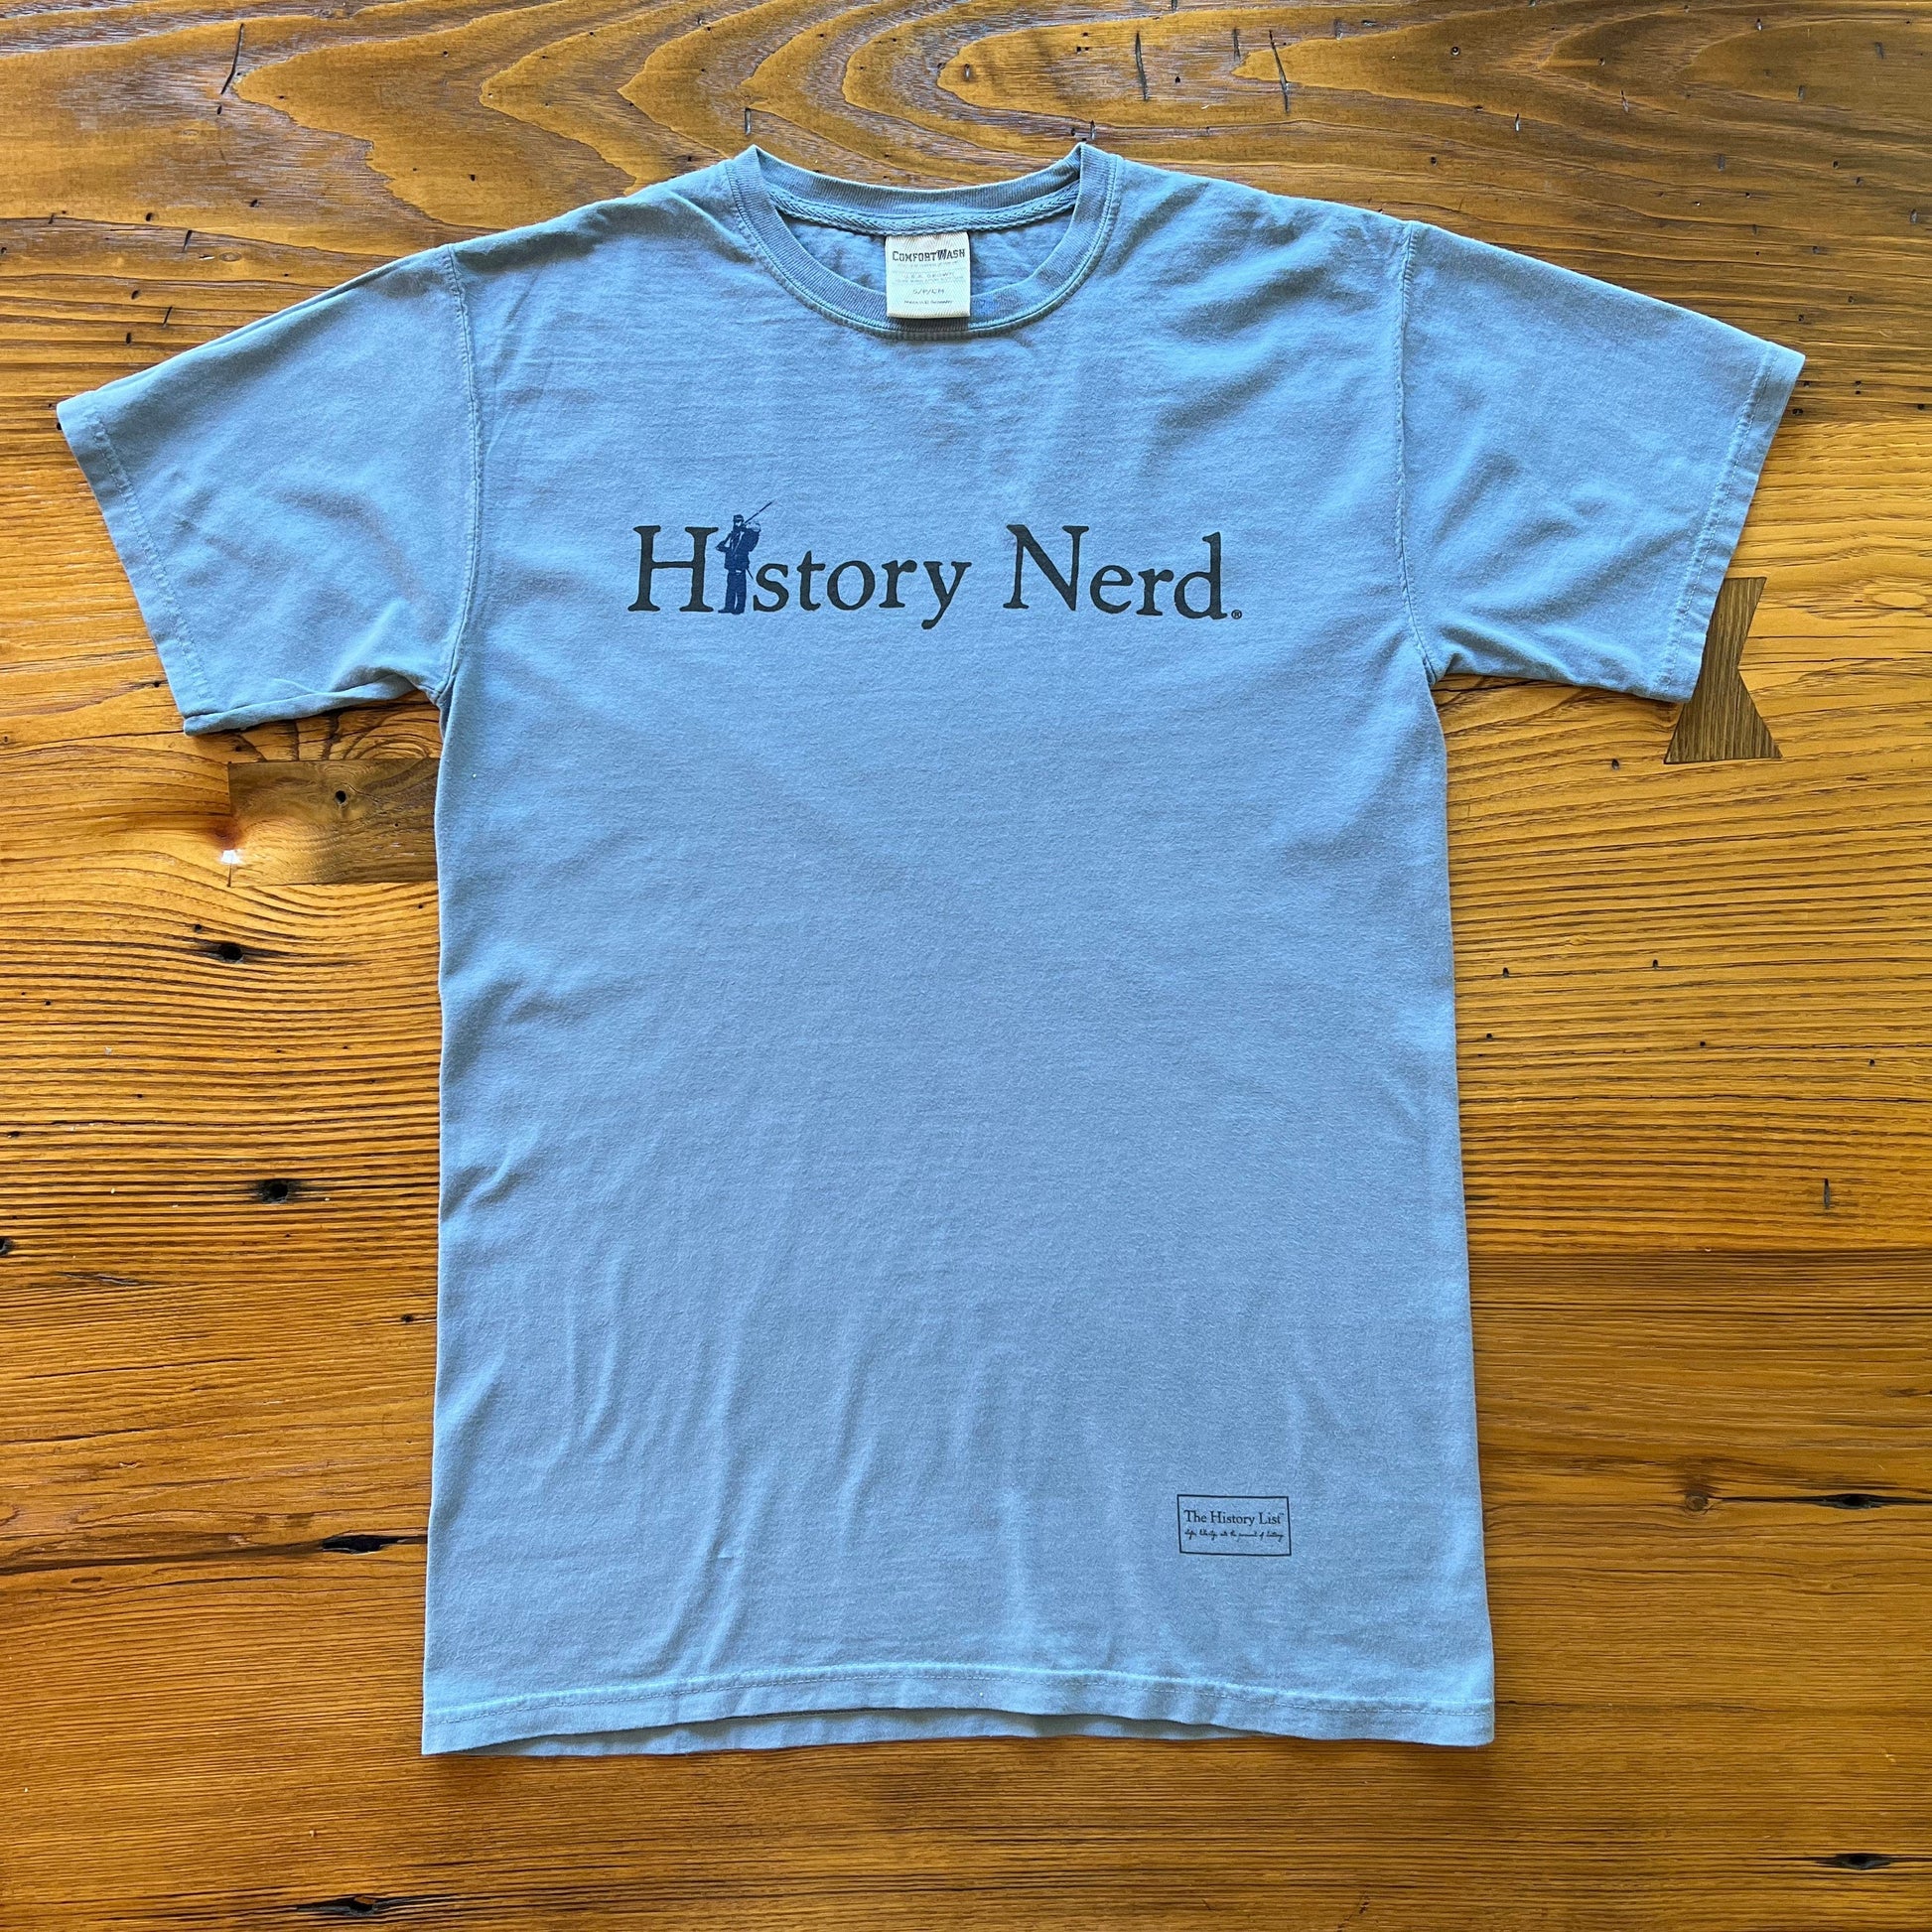 Civil War "History Nerd" Shirt in Saltwater blue from The History List store